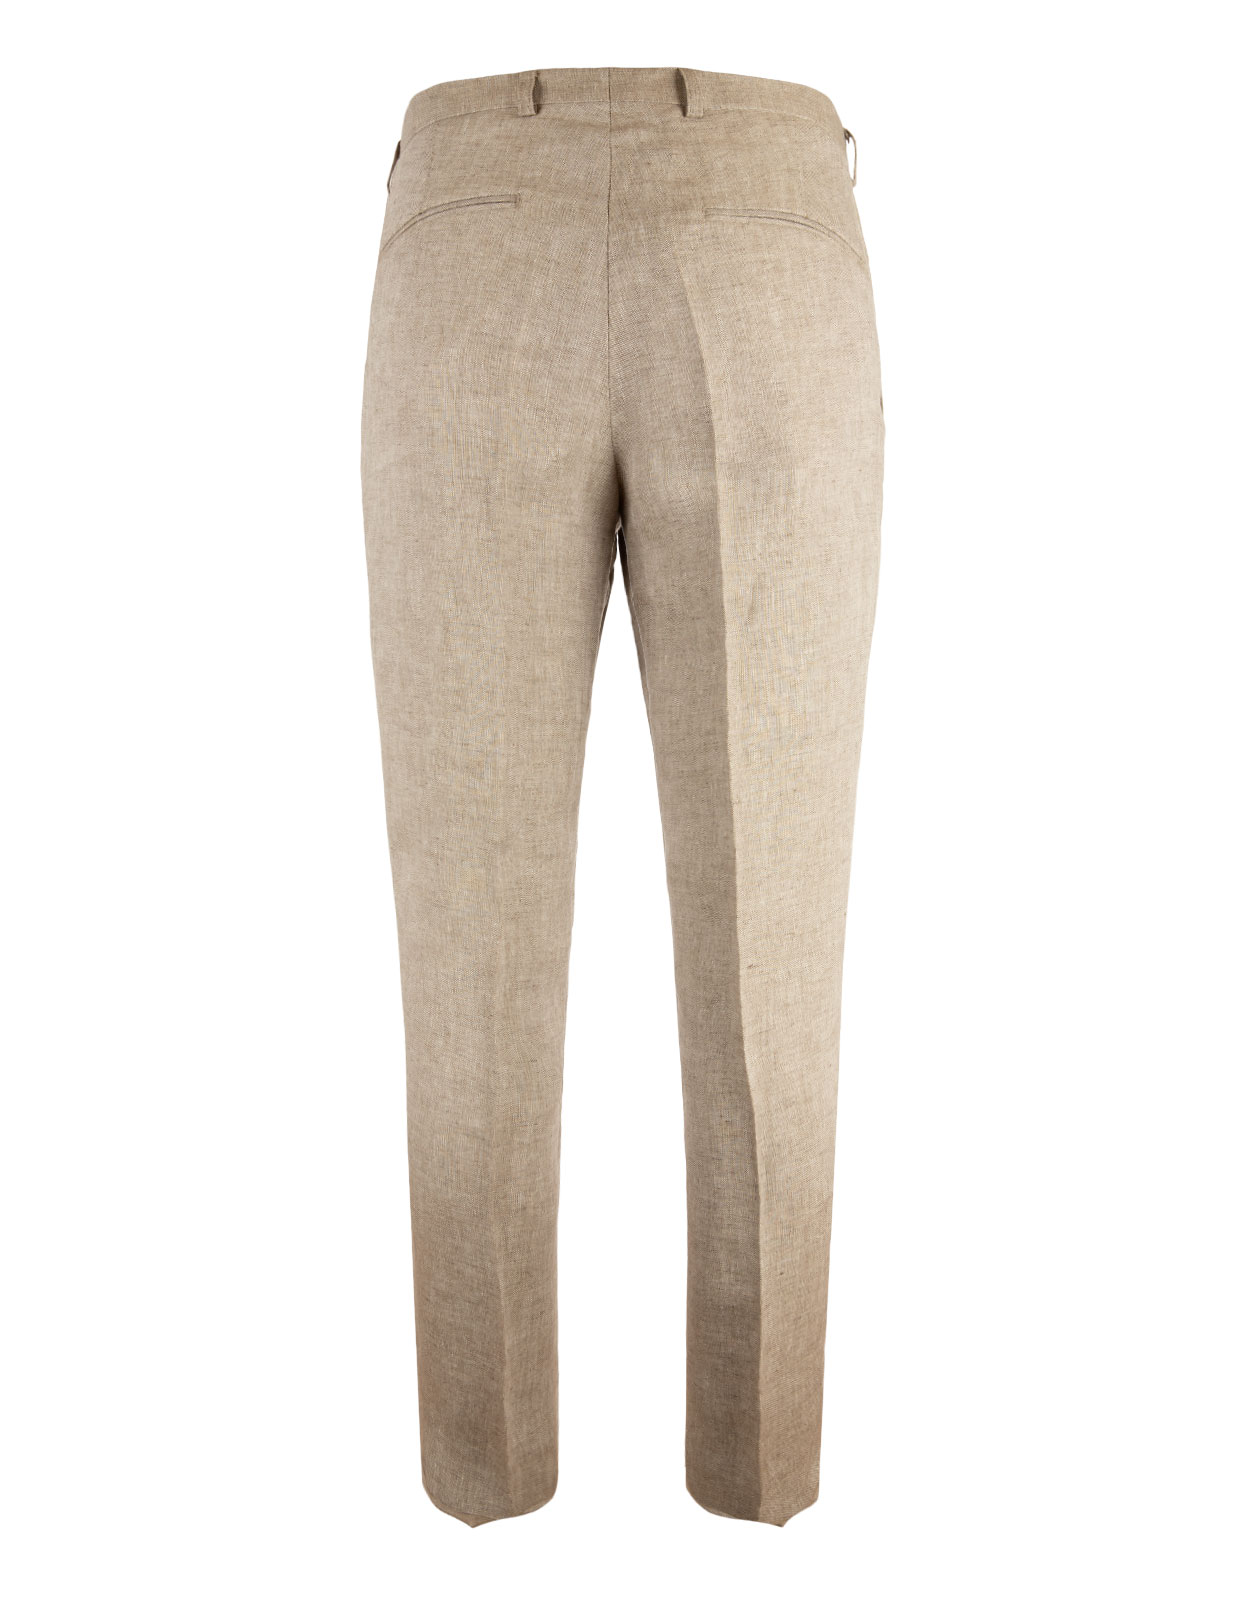 Denz Trousers Trench Beige Stl 50